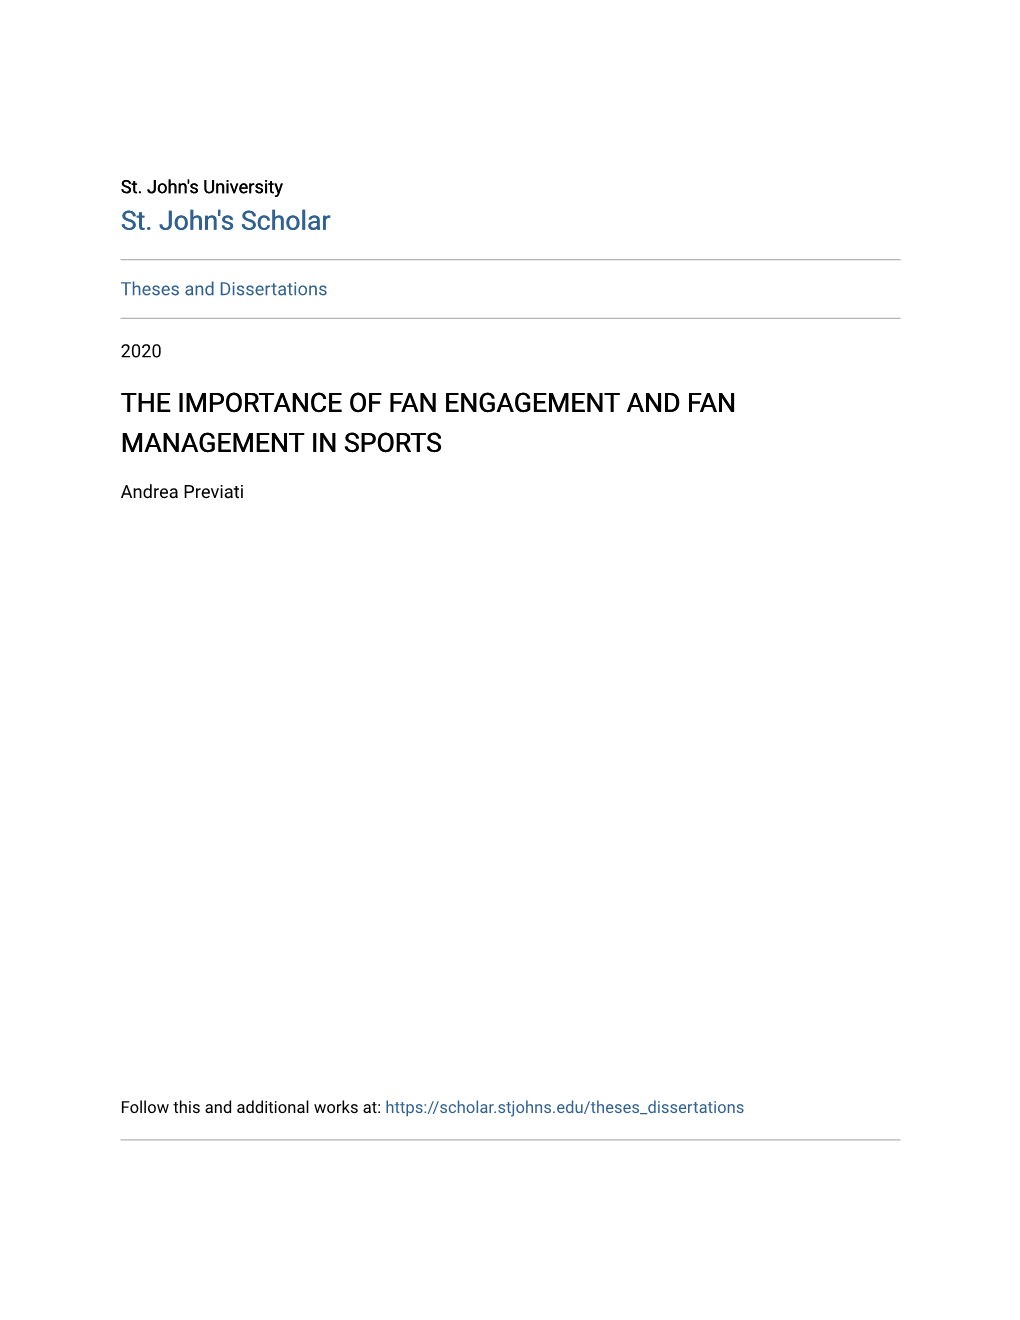 The Importance of Fan Engagement and Fan Management in Sports